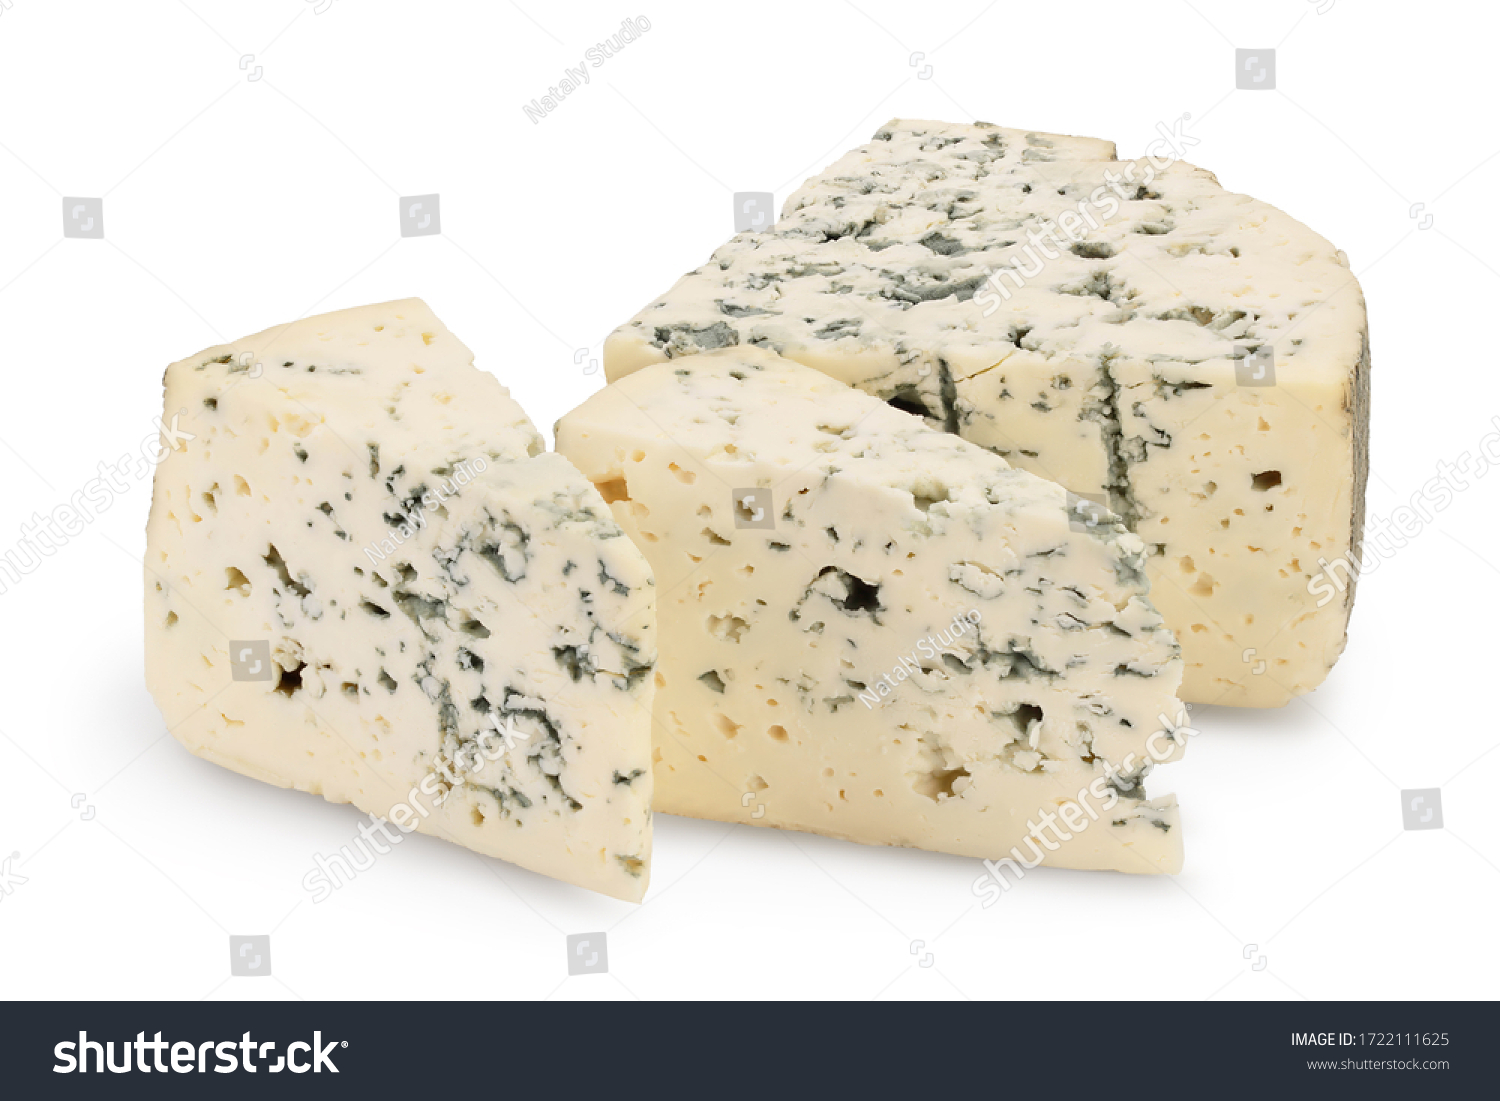 Blue cheese isolated on white background with clipping path and full depth of field. #1722111625